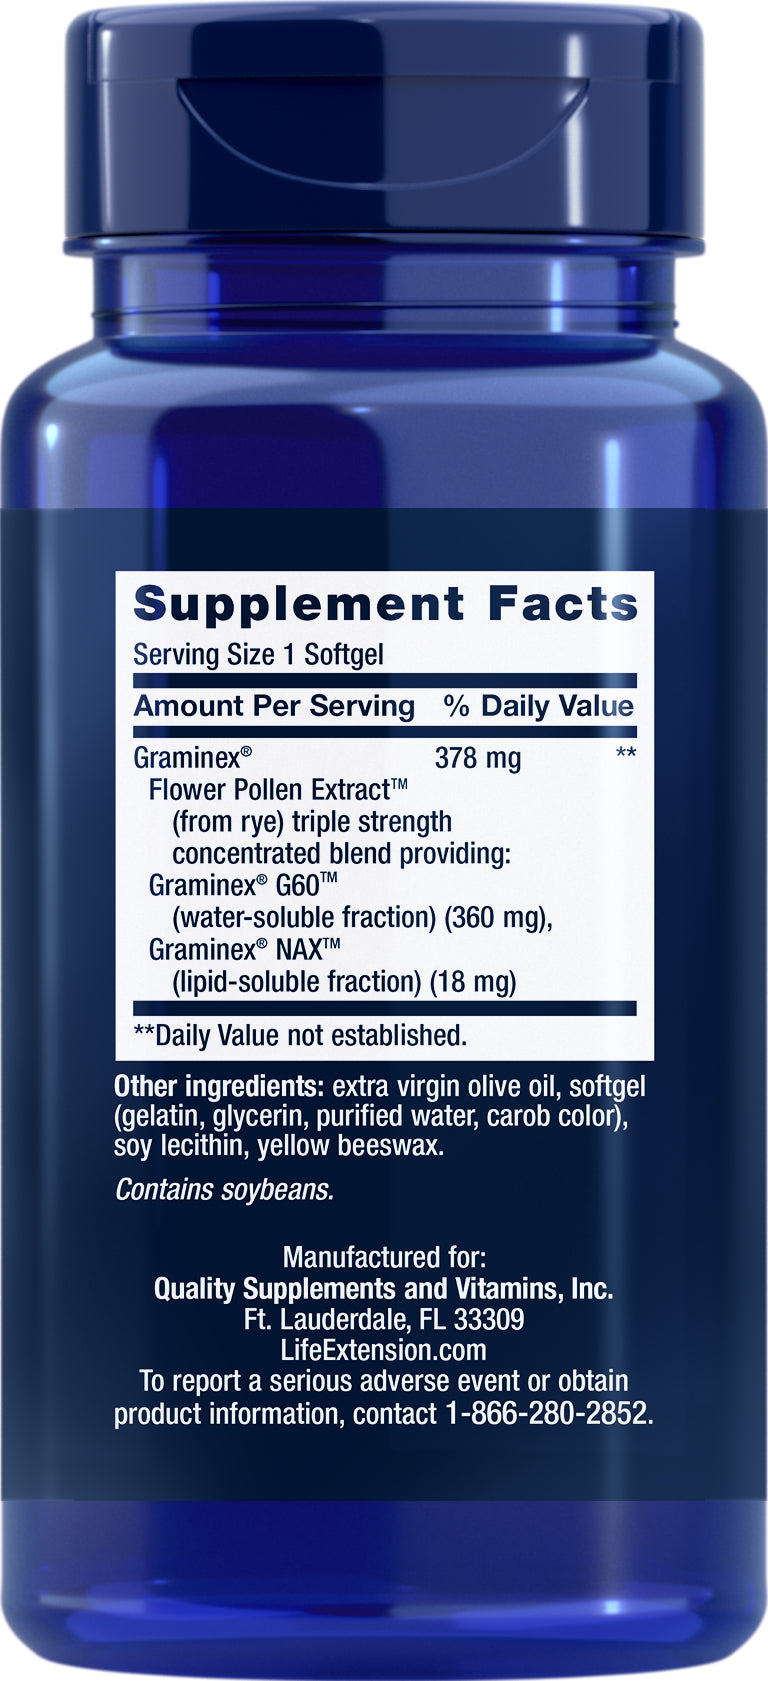 Triple Strength ProstaPollen™ 30 softgels by Life Extension